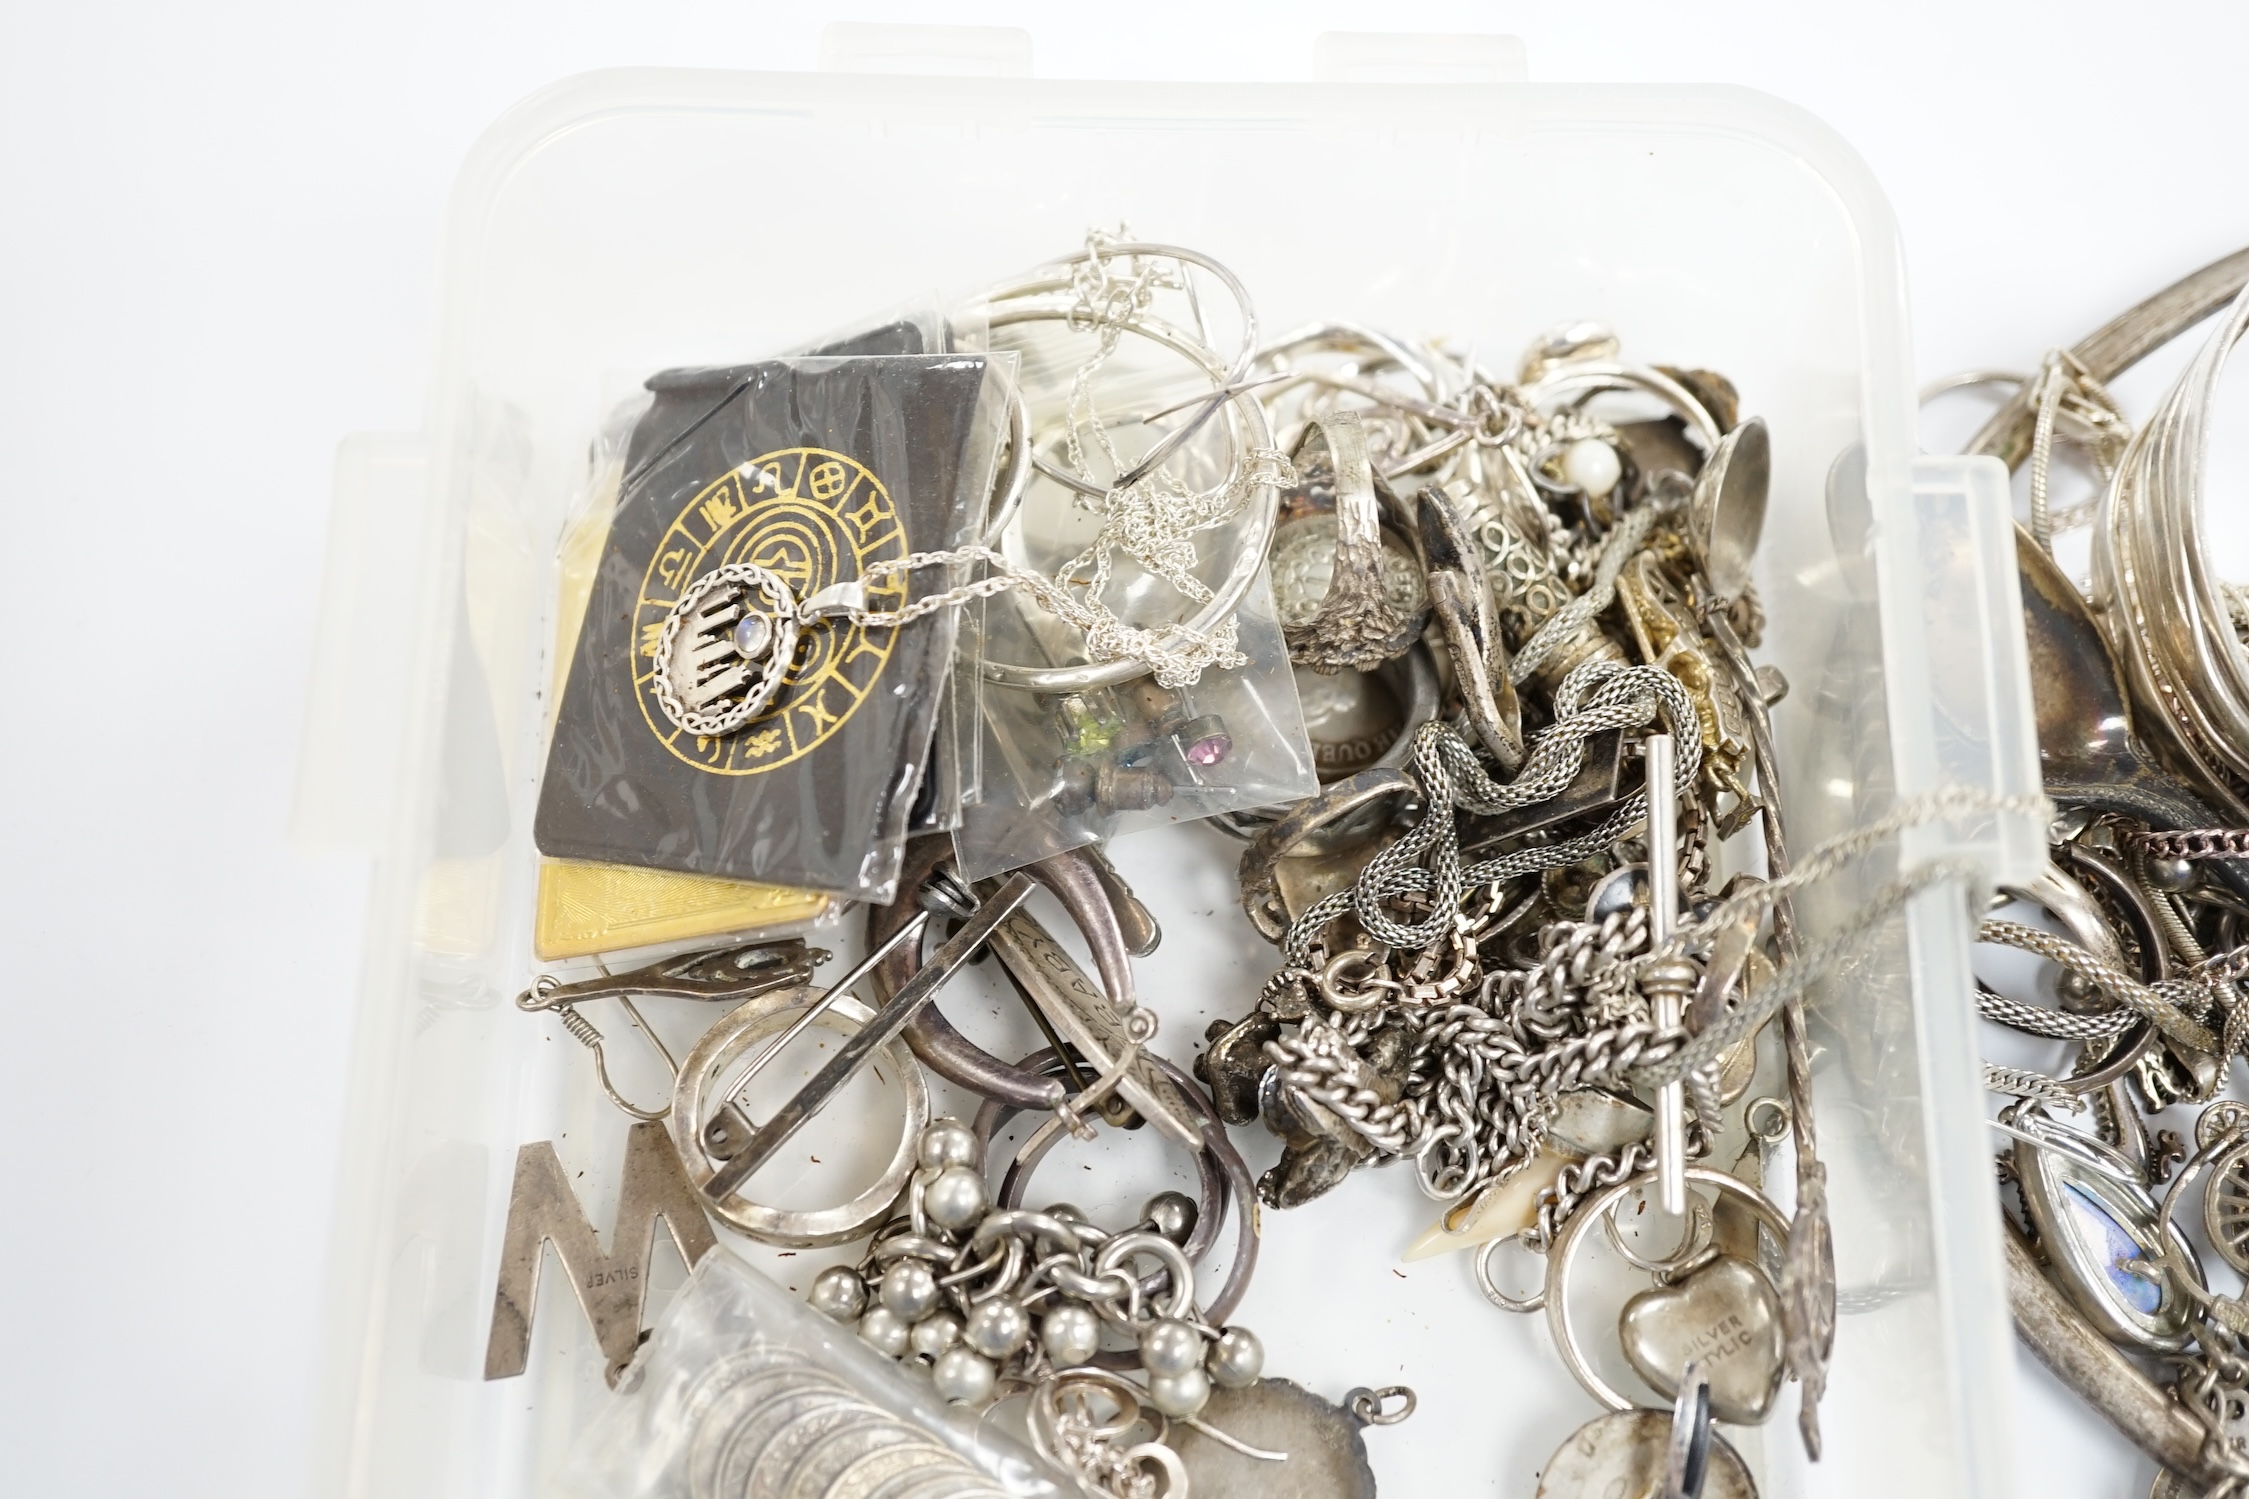 A quantity of assorted mainly silver, white metal and 925 jewellery including rings and bracelets and other items.